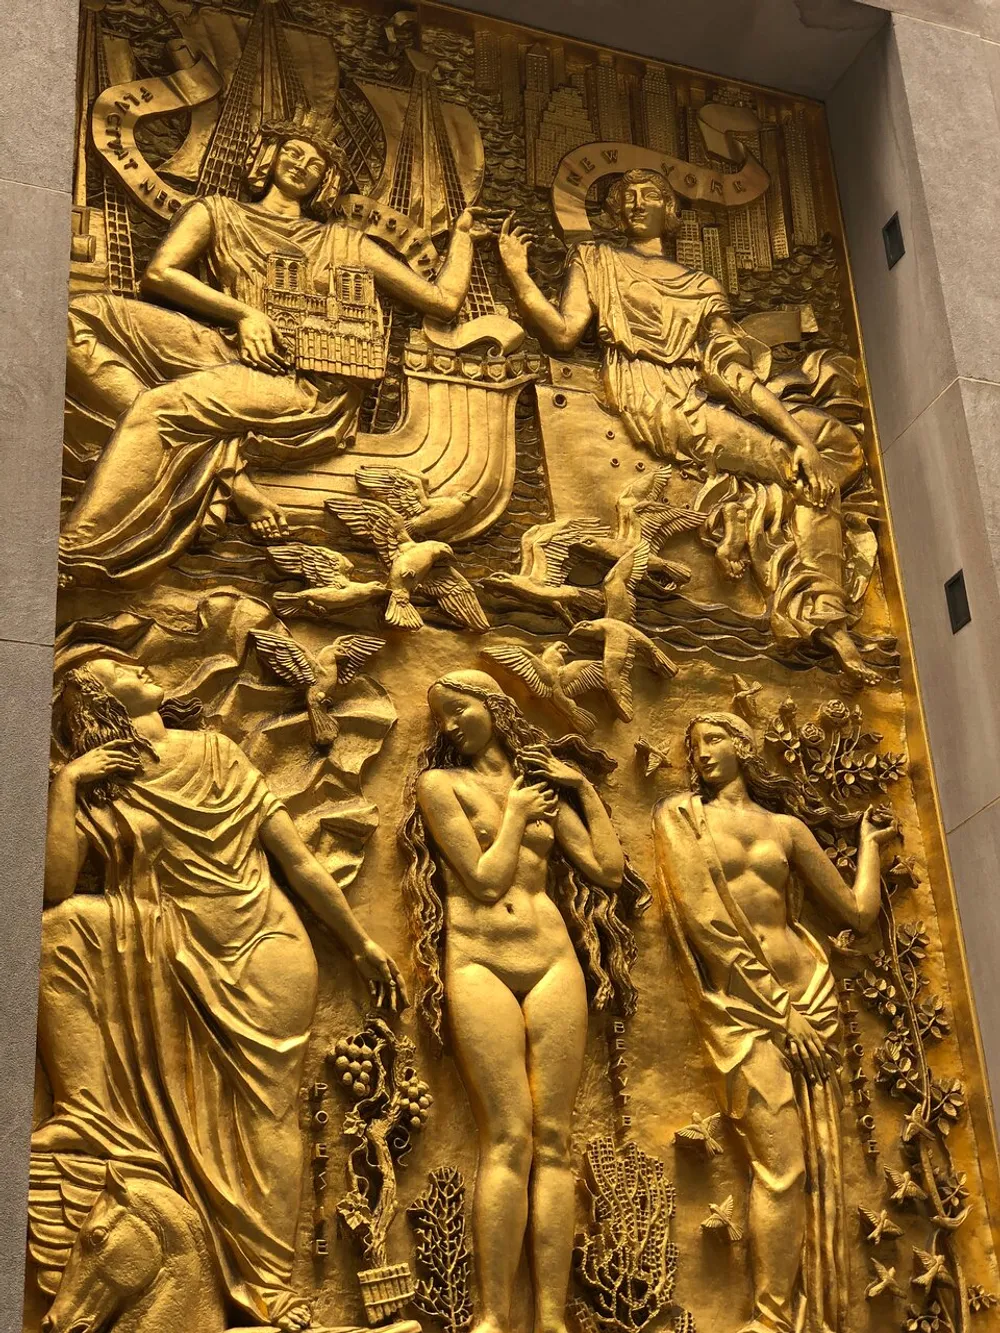 The image shows a detailed golden relief with allegorical figures architectural elements and various symbols evoking themes of classical antiquity and mythology